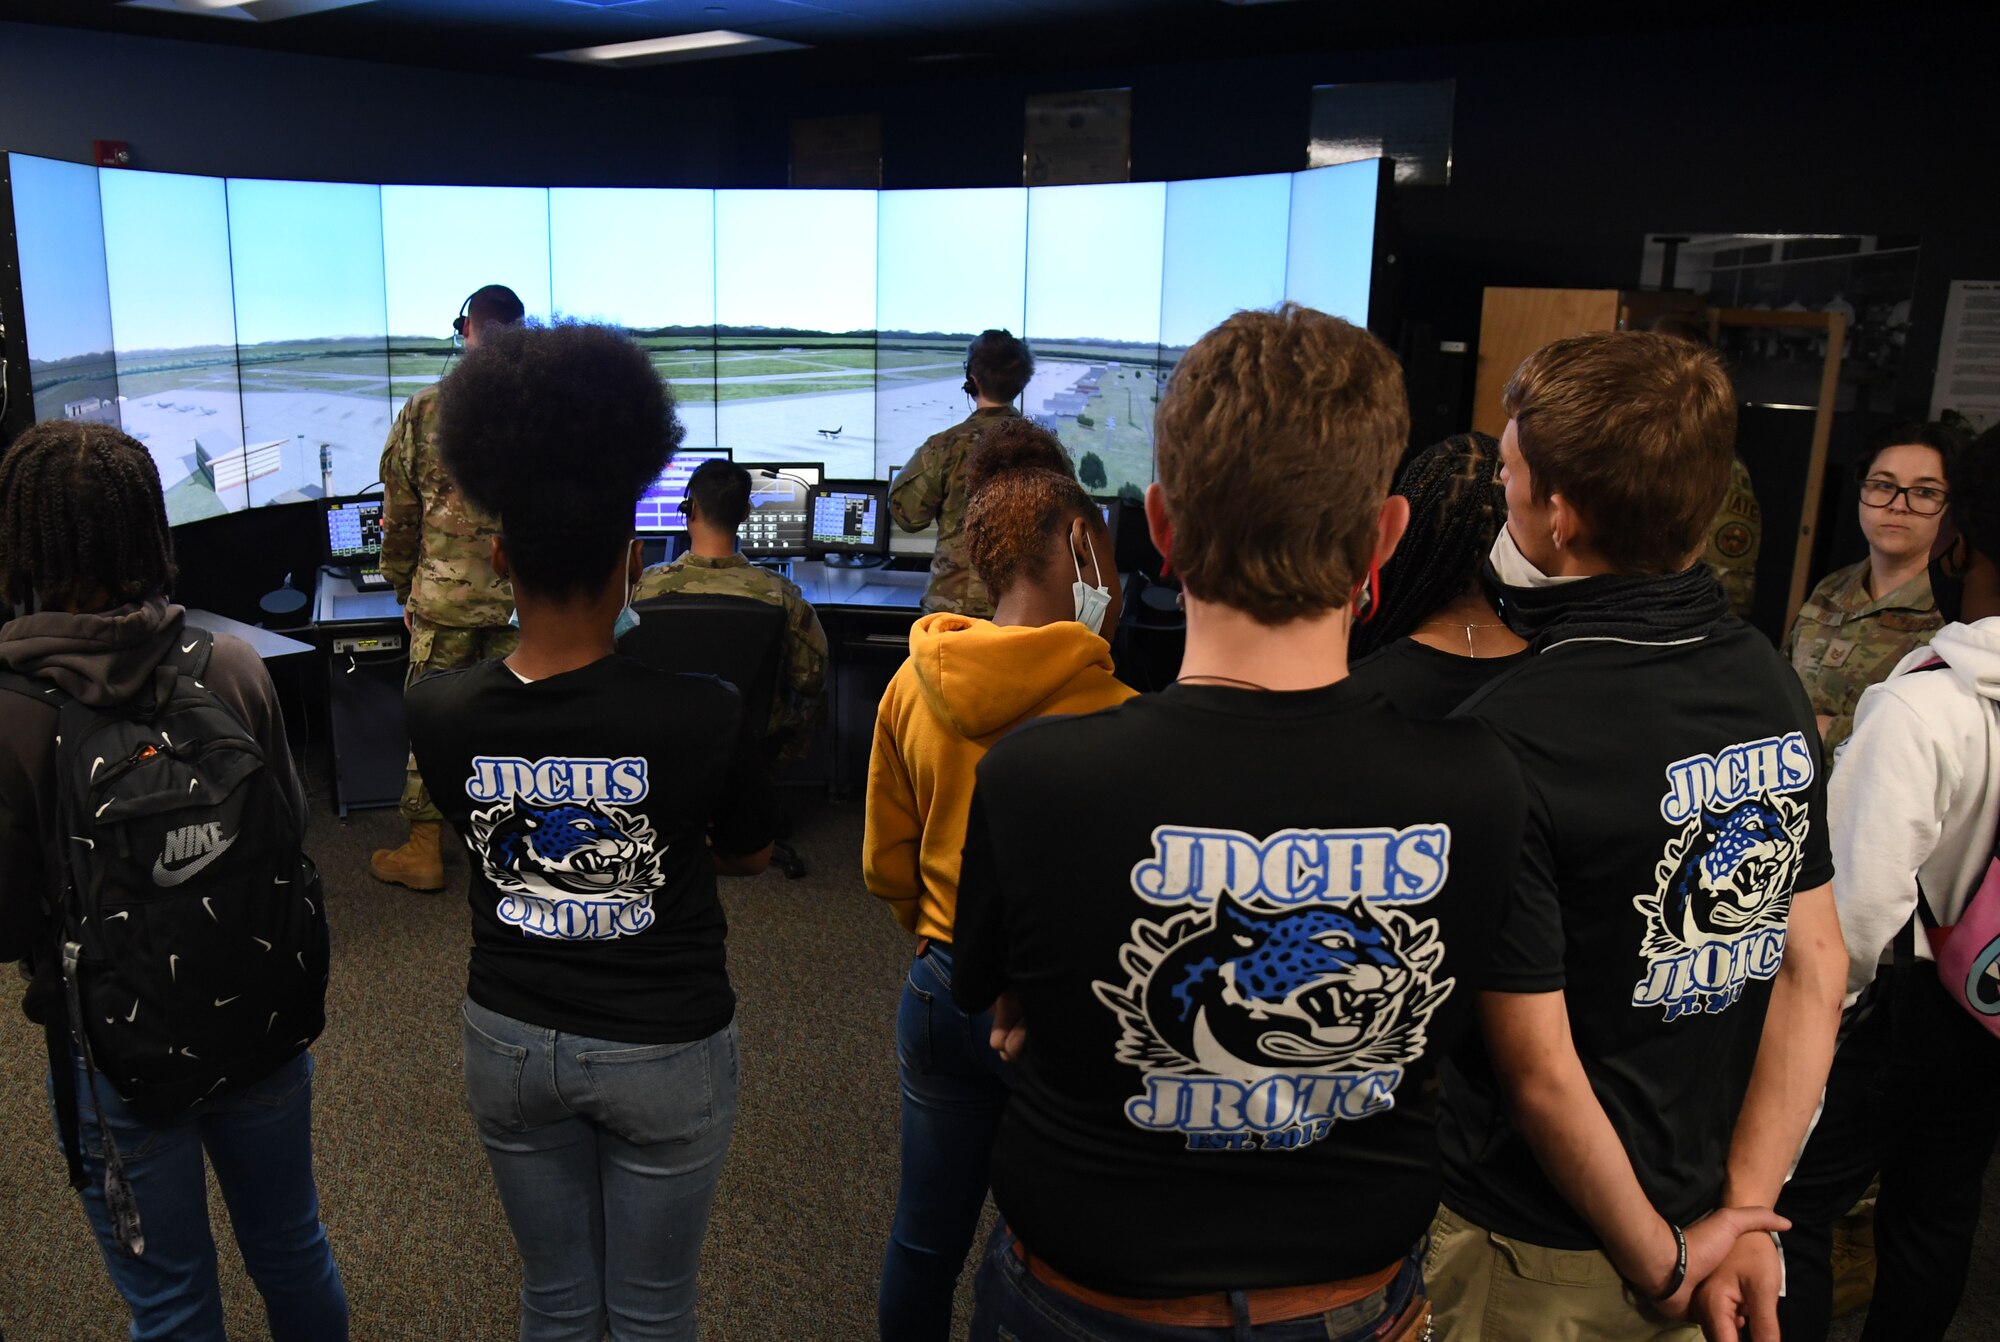 Jefferson Davis County High School Junior ROTC cadets visit an air traffic control tower simulator inside Cody Hall at Keesler Air Force Base, Mississippi, April 12, 2022. Throughout their visit to Keesler, more than 30 cadets received a Hurricane Hunters briefing, visited air traffic control training courses and received a military working dog demonstration. (U.S. Air Force photo by Kemberly Groue)